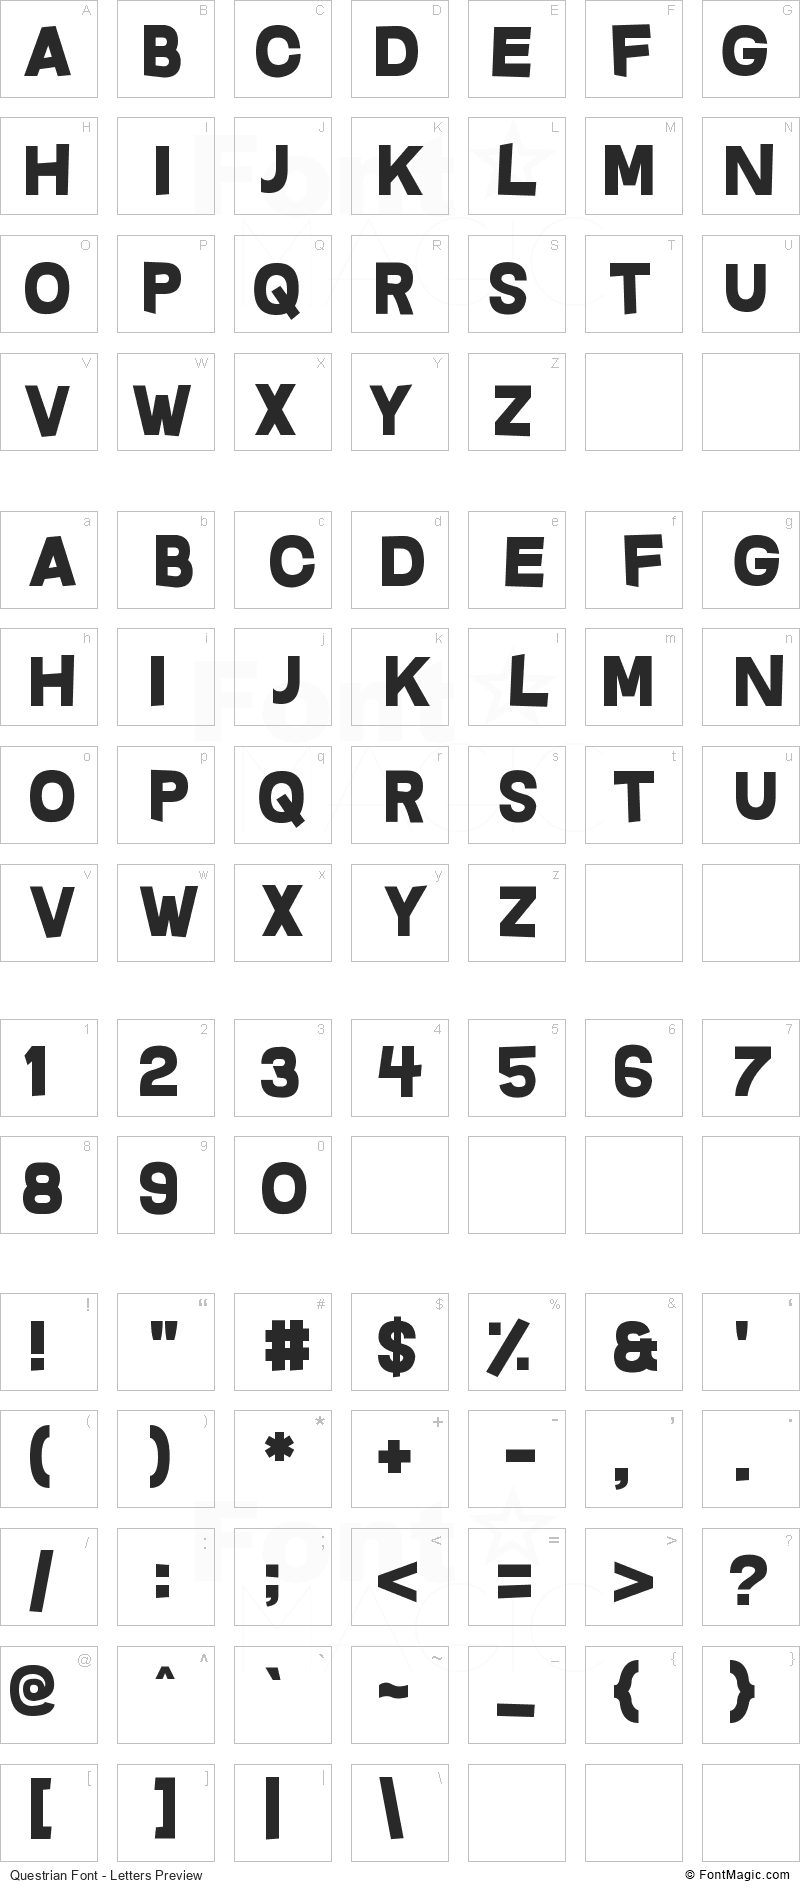 Questrian Font - All Latters Preview Chart